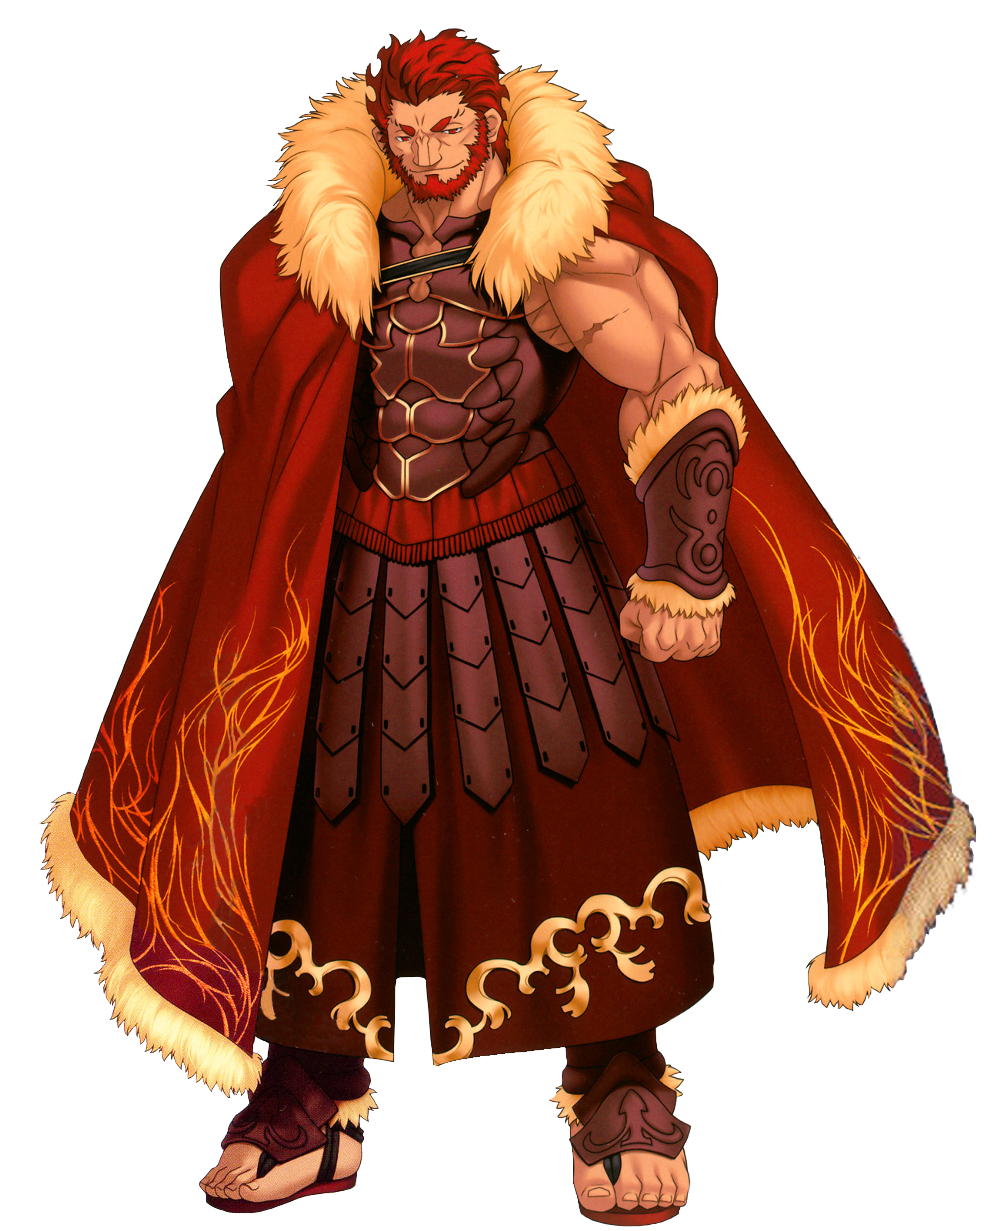 Alexander  The Great  Fate Series  Fate zero Fate Alexander the great